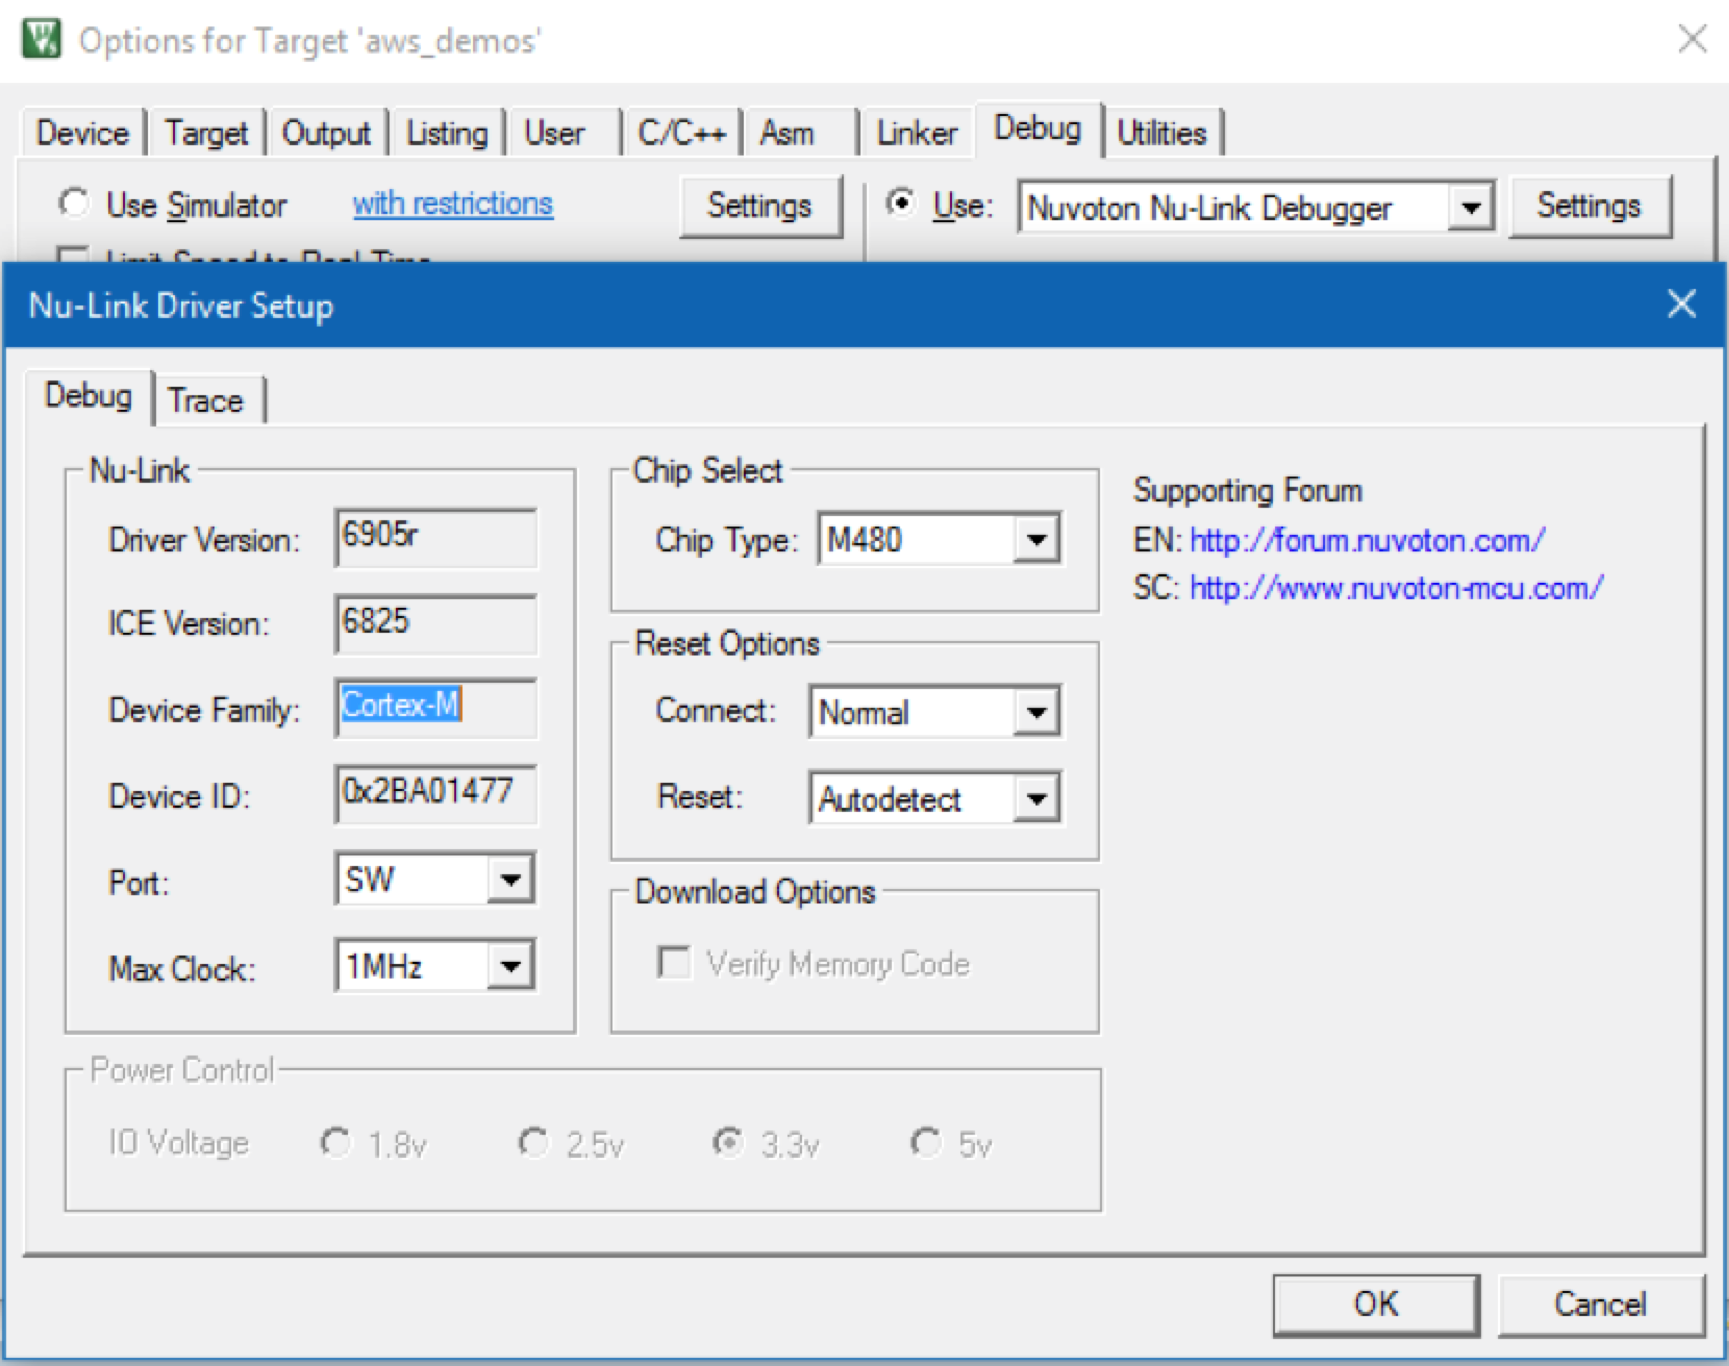 Nu-Link Debugger settings dialog with options for driver version, ICE version, device family, device ID, port, max clock, chip type, connection mode, reset option, and power control voltages.